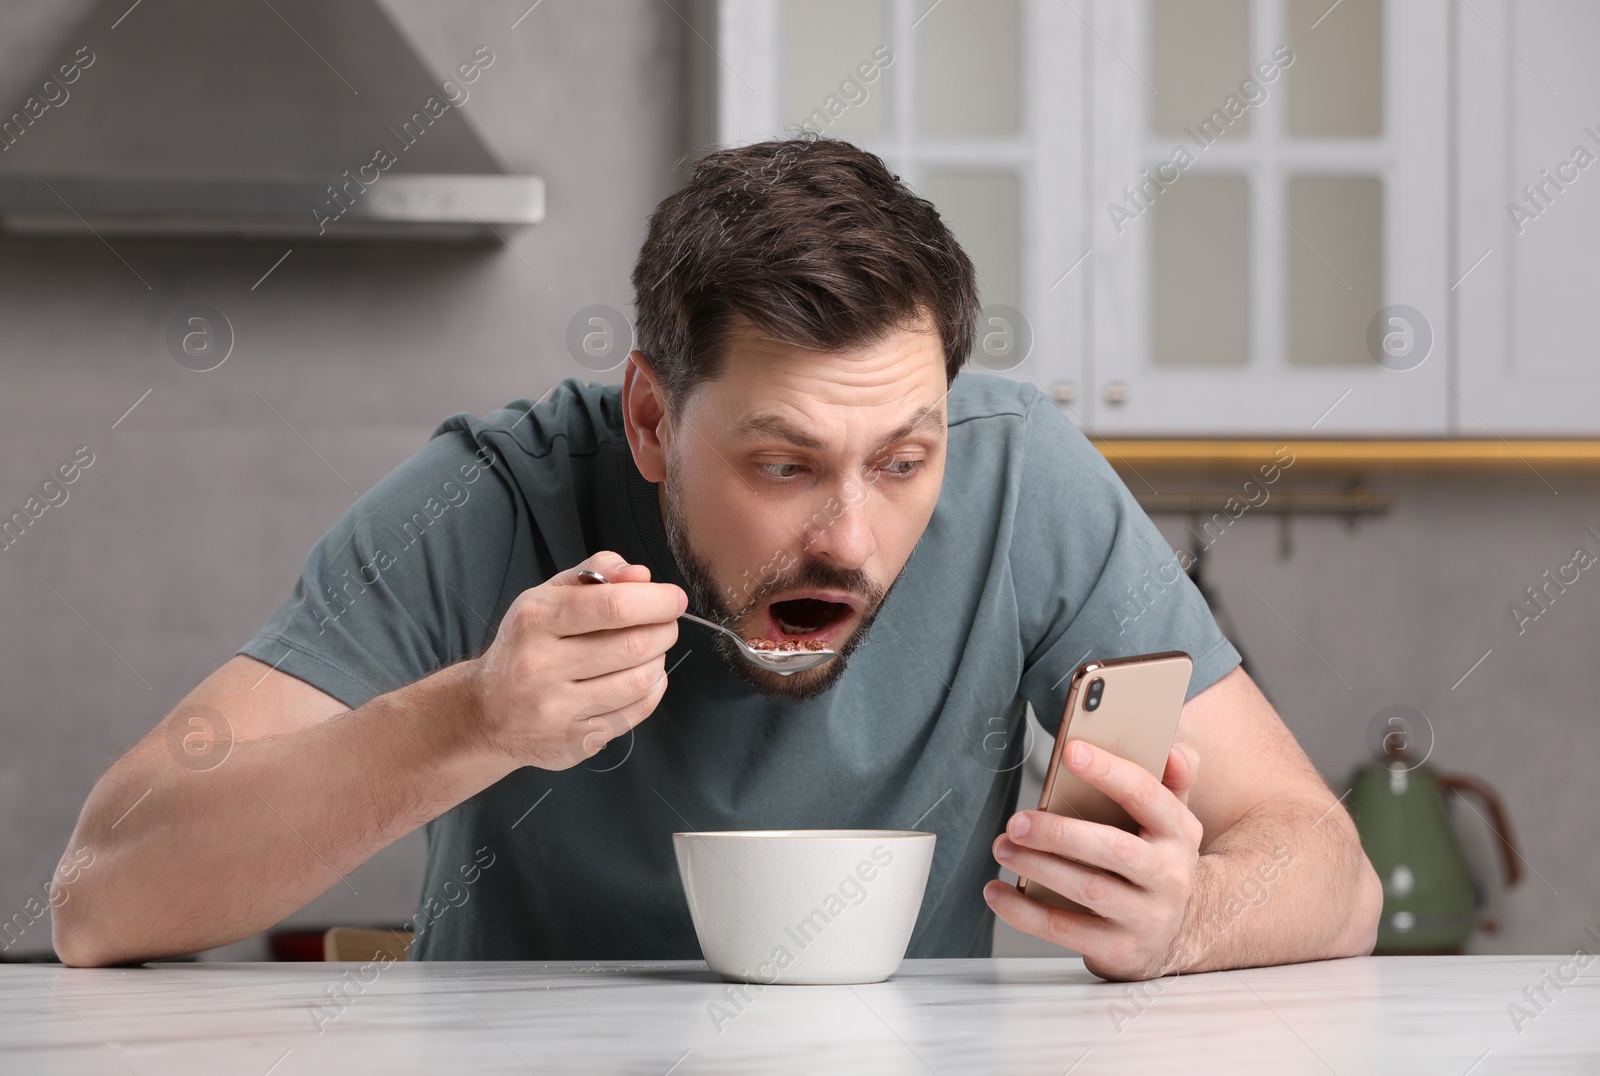 Photo of Man using smartphone while having breakfast at table in kitchen. Internet addiction